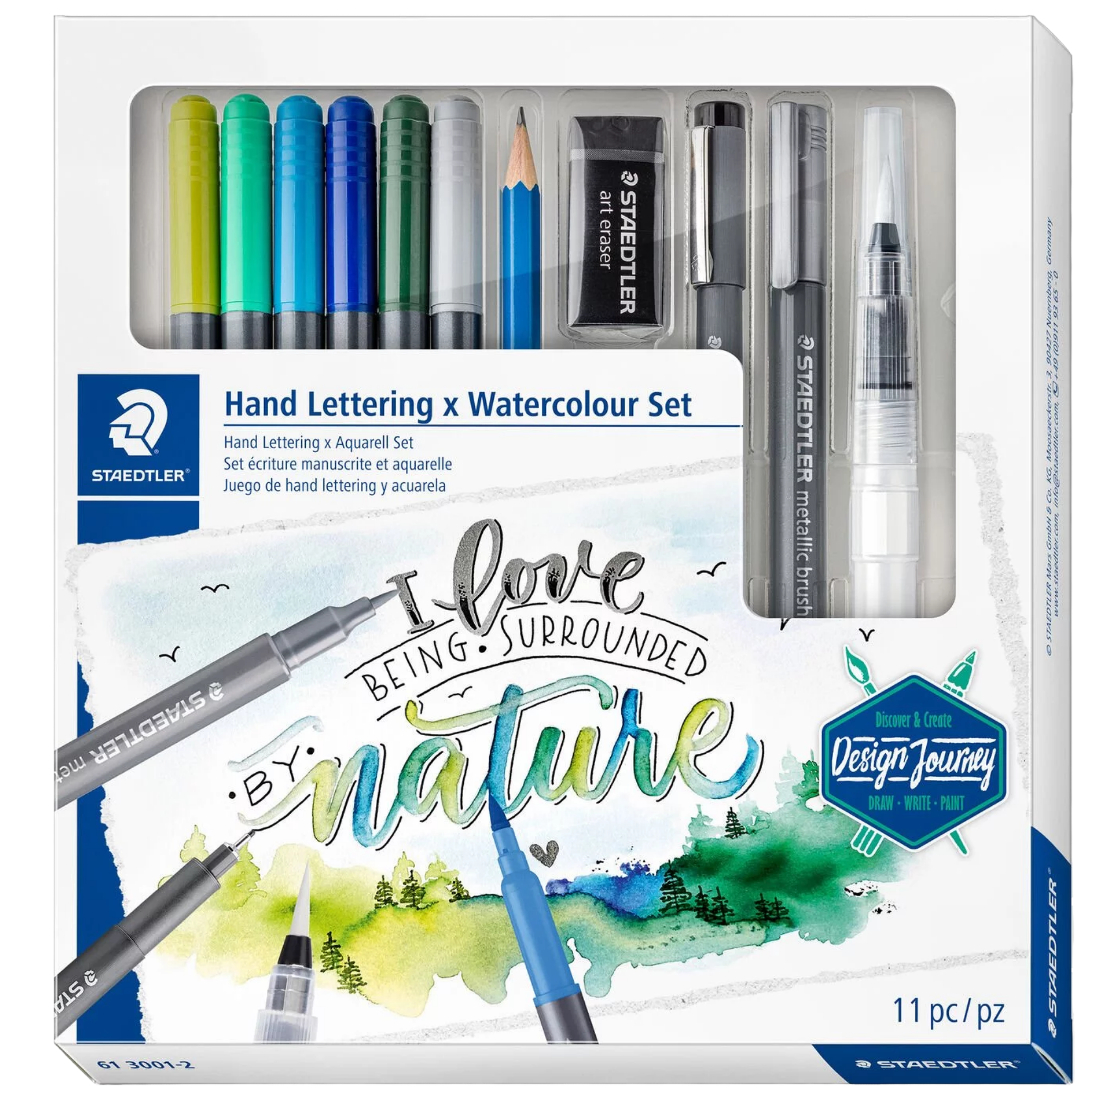 Pack Marcadores Hand Lettering  Watercolour STAEDTLER